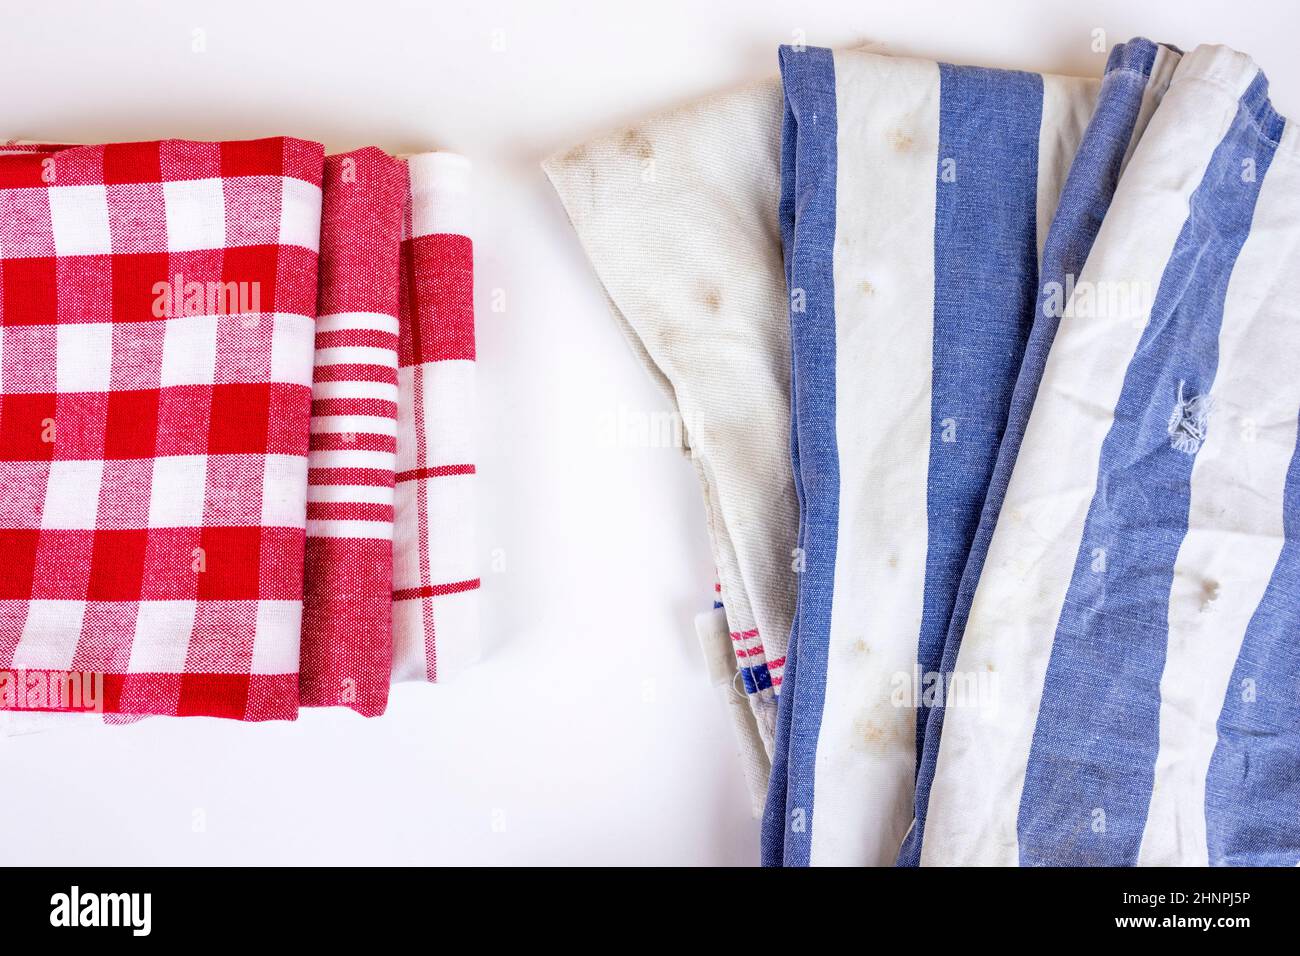 https://c8.alamy.com/comp/2HNPJ5P/three-new-red-checkered-kitchen-picnic-towels-folded-versus-old-dirty-torn-blue-cloth-towels-cleaning-and-regularly-changing-kitchen-rags-and-cloth-2HNPJ5P.jpg